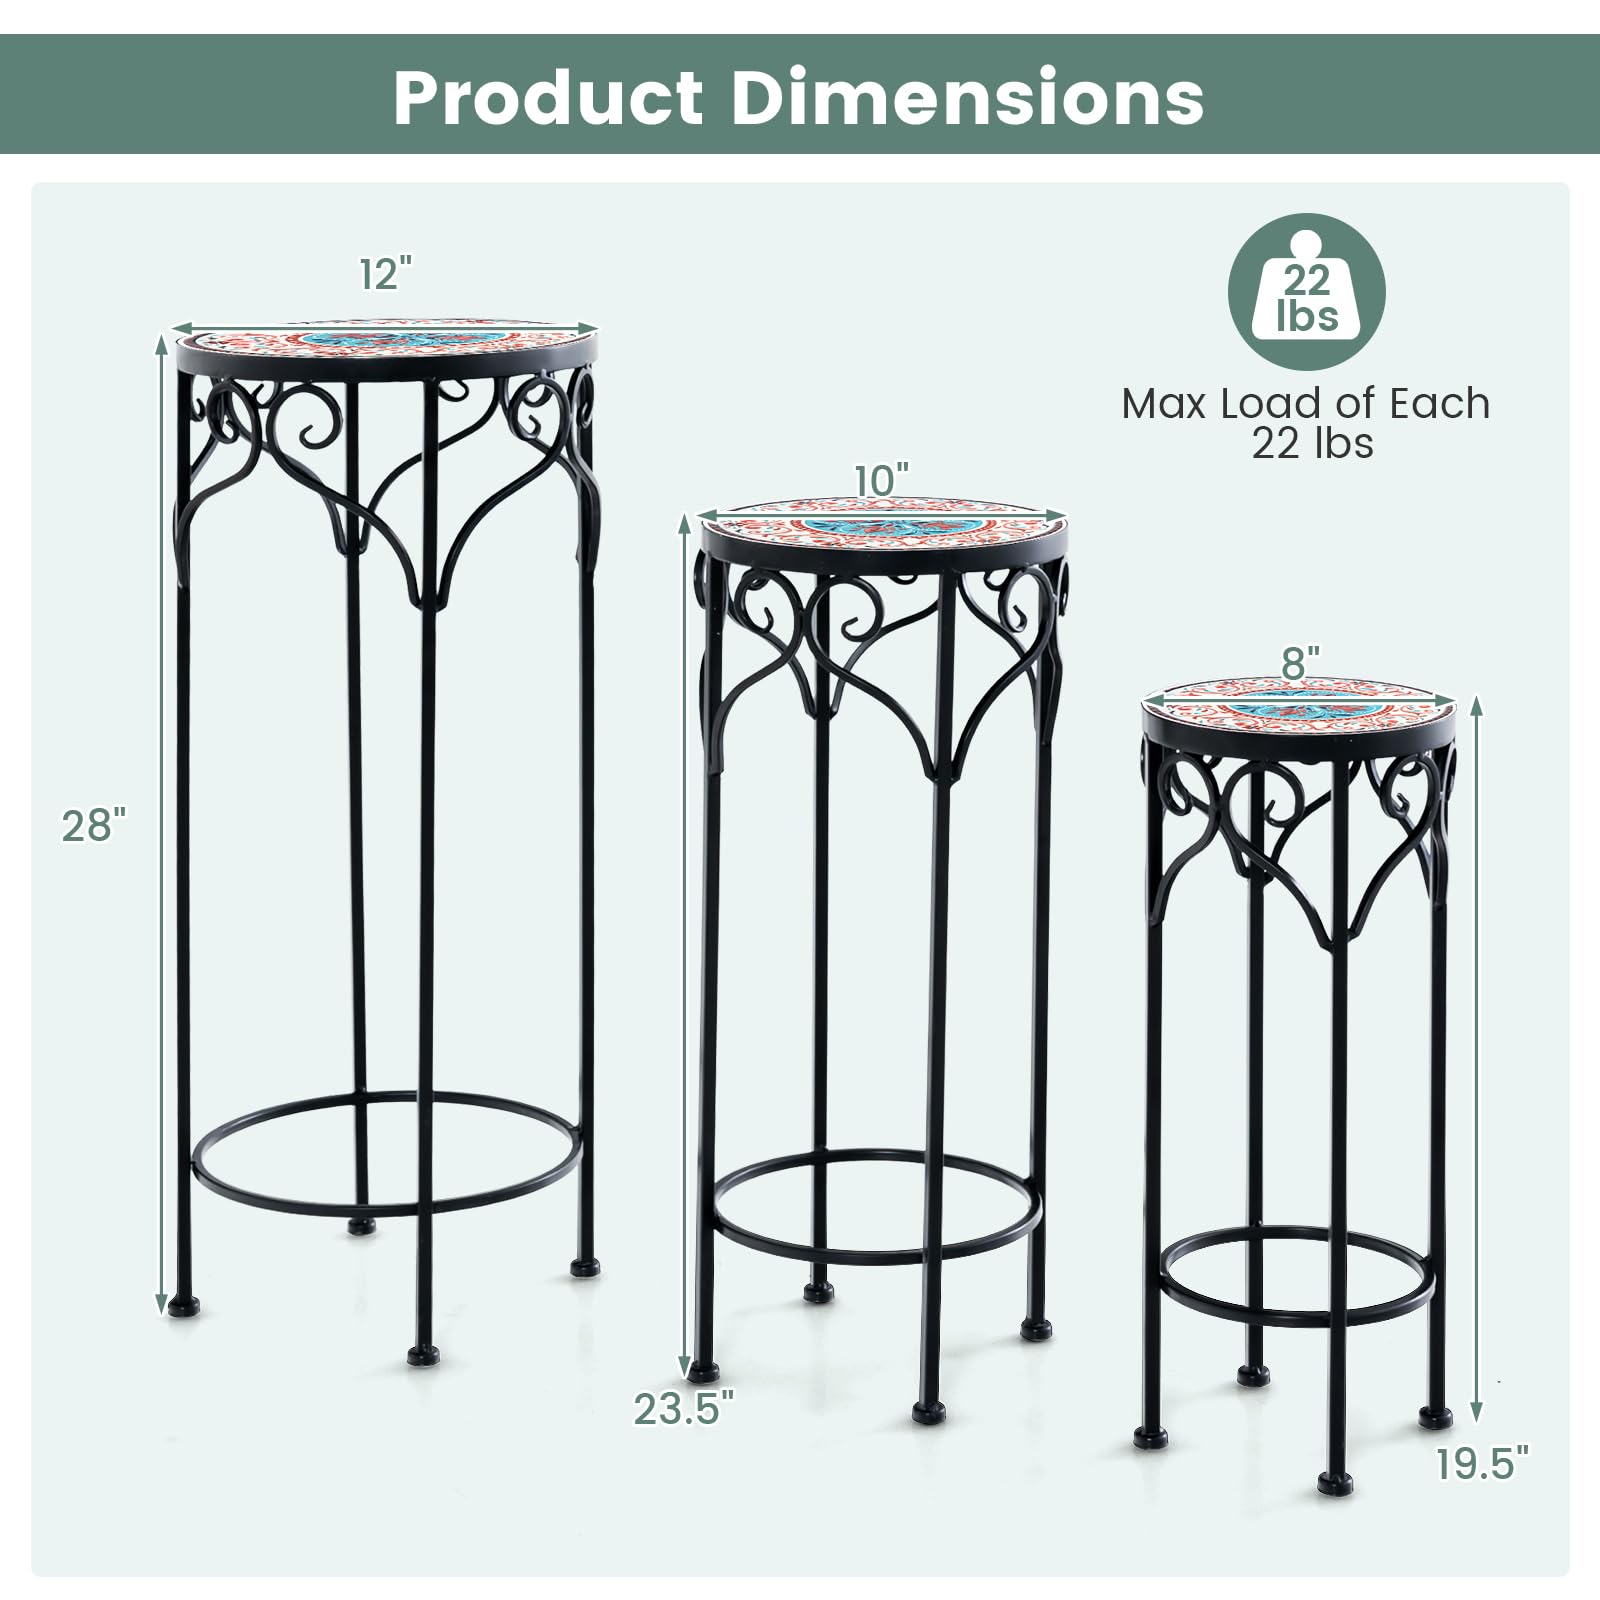 Giantex Metal Plant Stand Set of 3, 28" Mosaic Tall Flower Stand with Ceramic Top